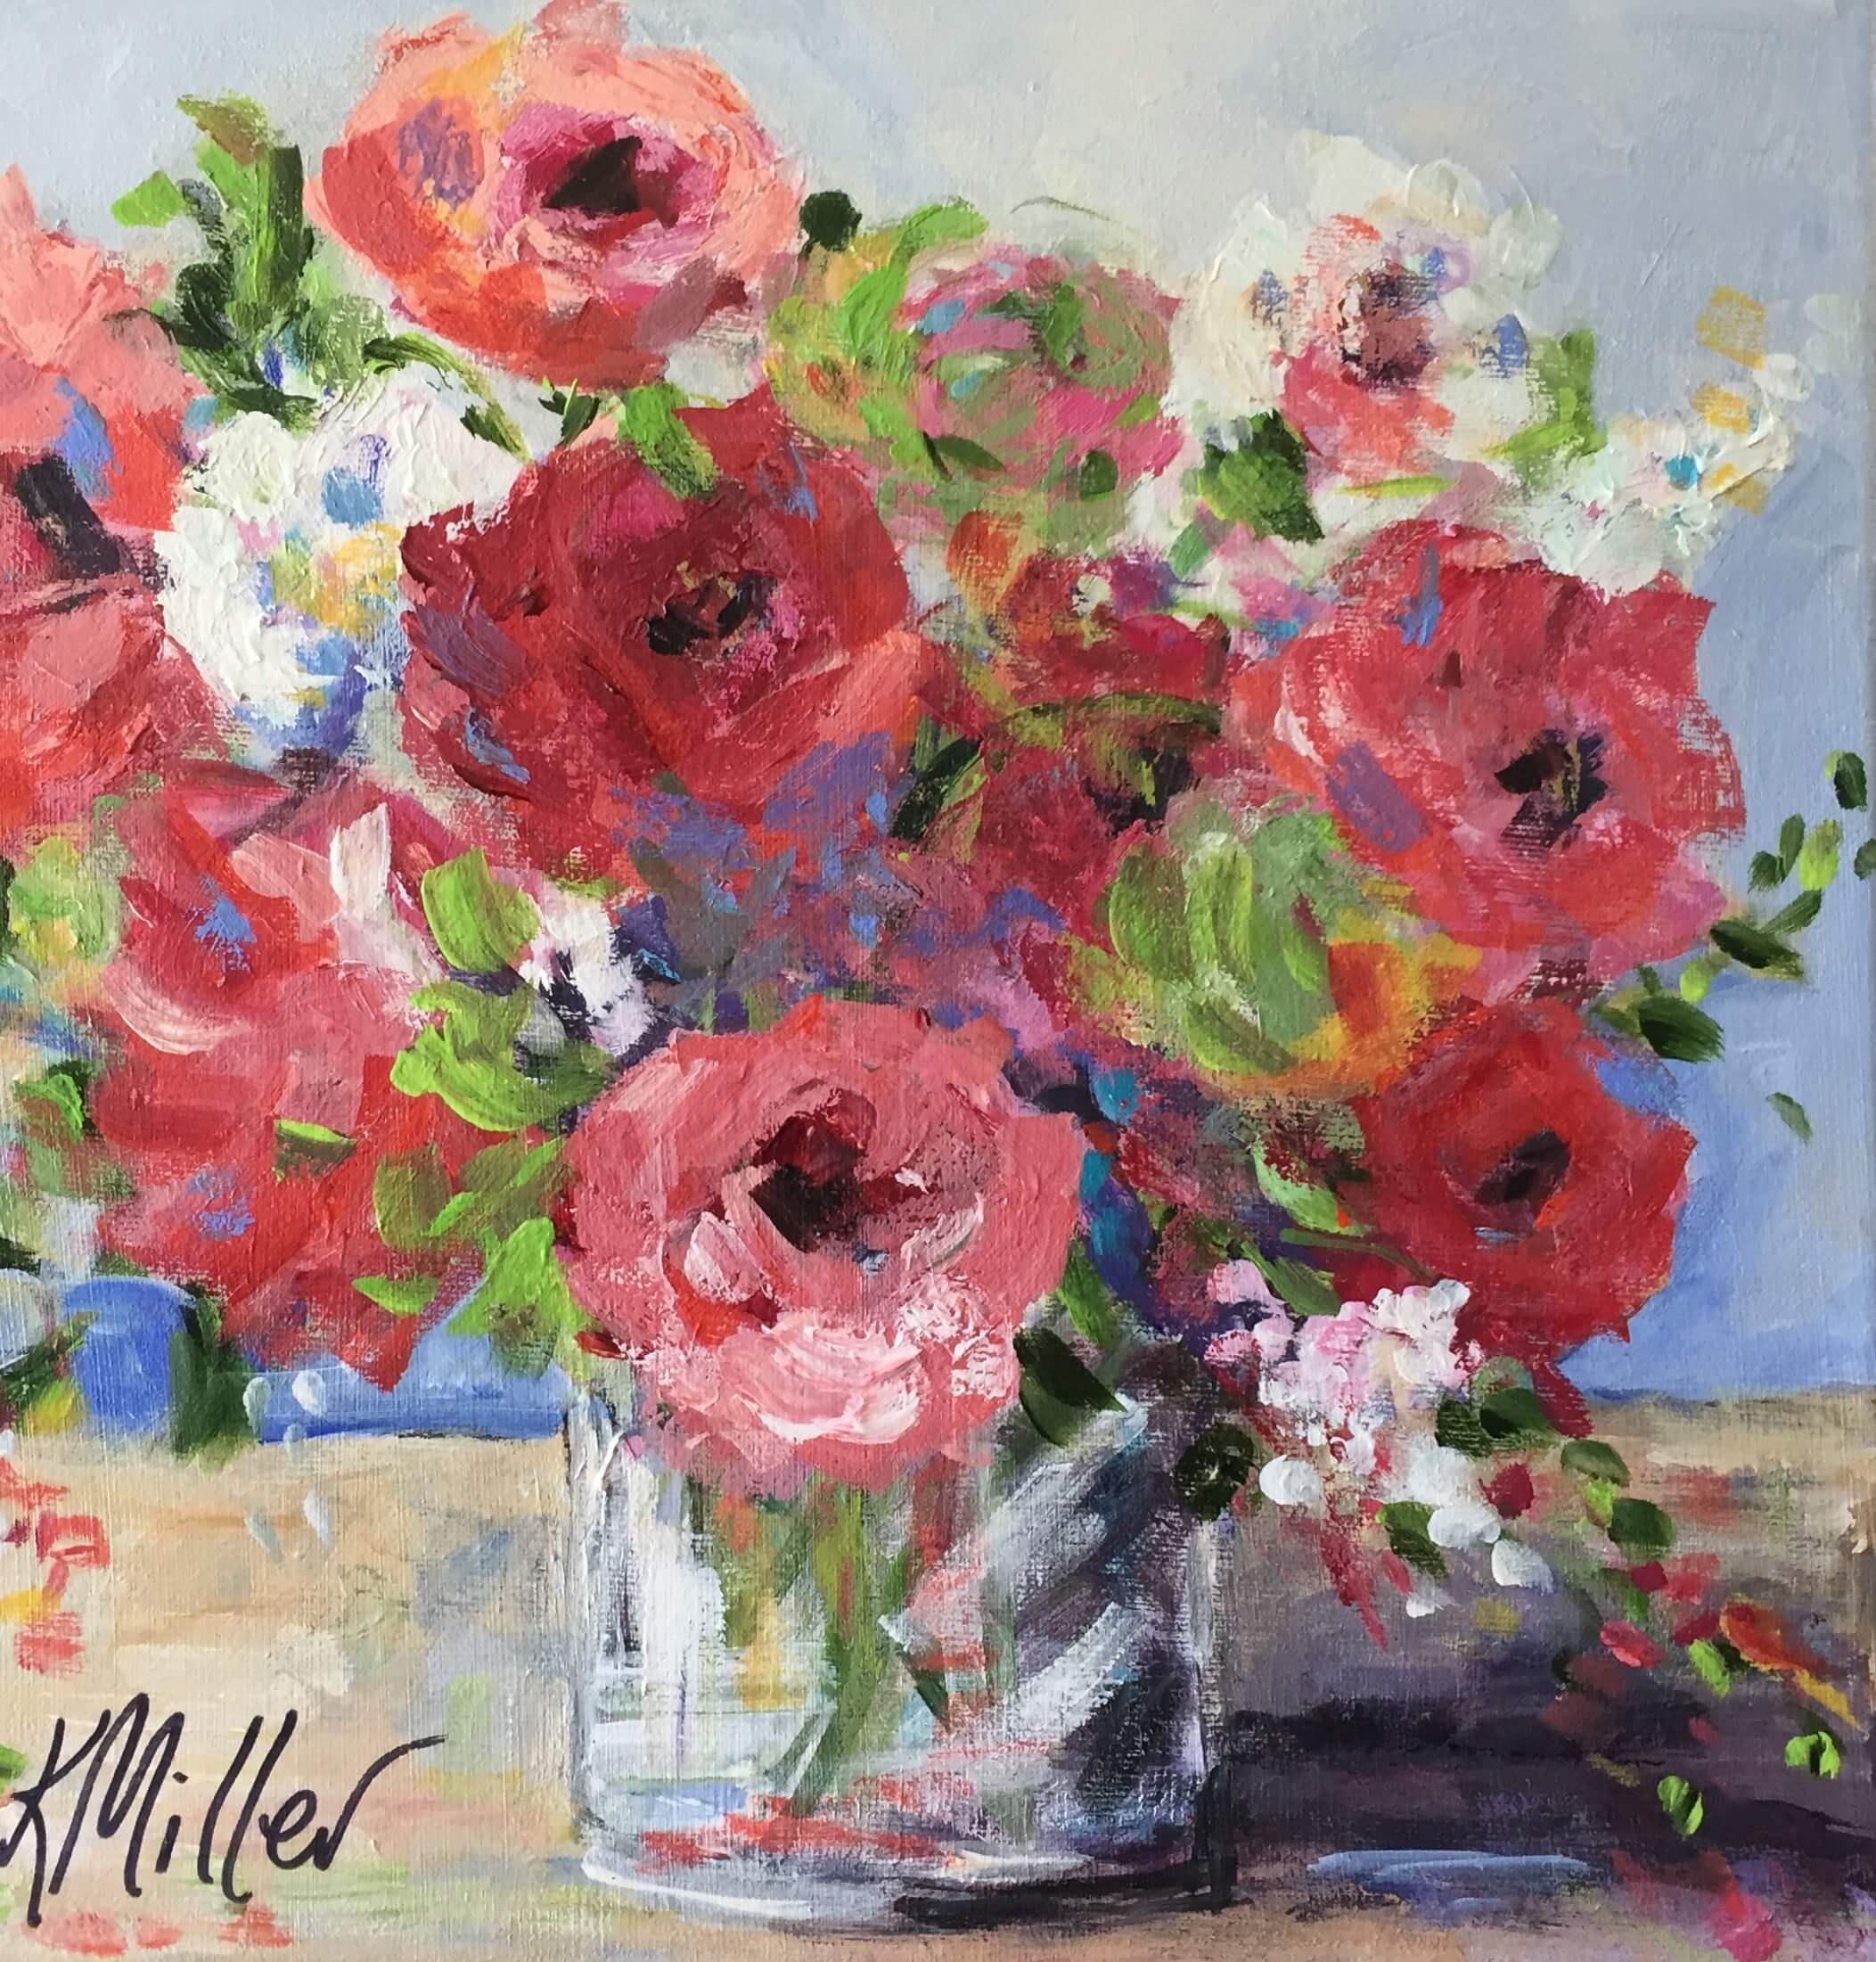 Flowers 12"x12" Acrylic on Canvas Original painting by Kathy Miller